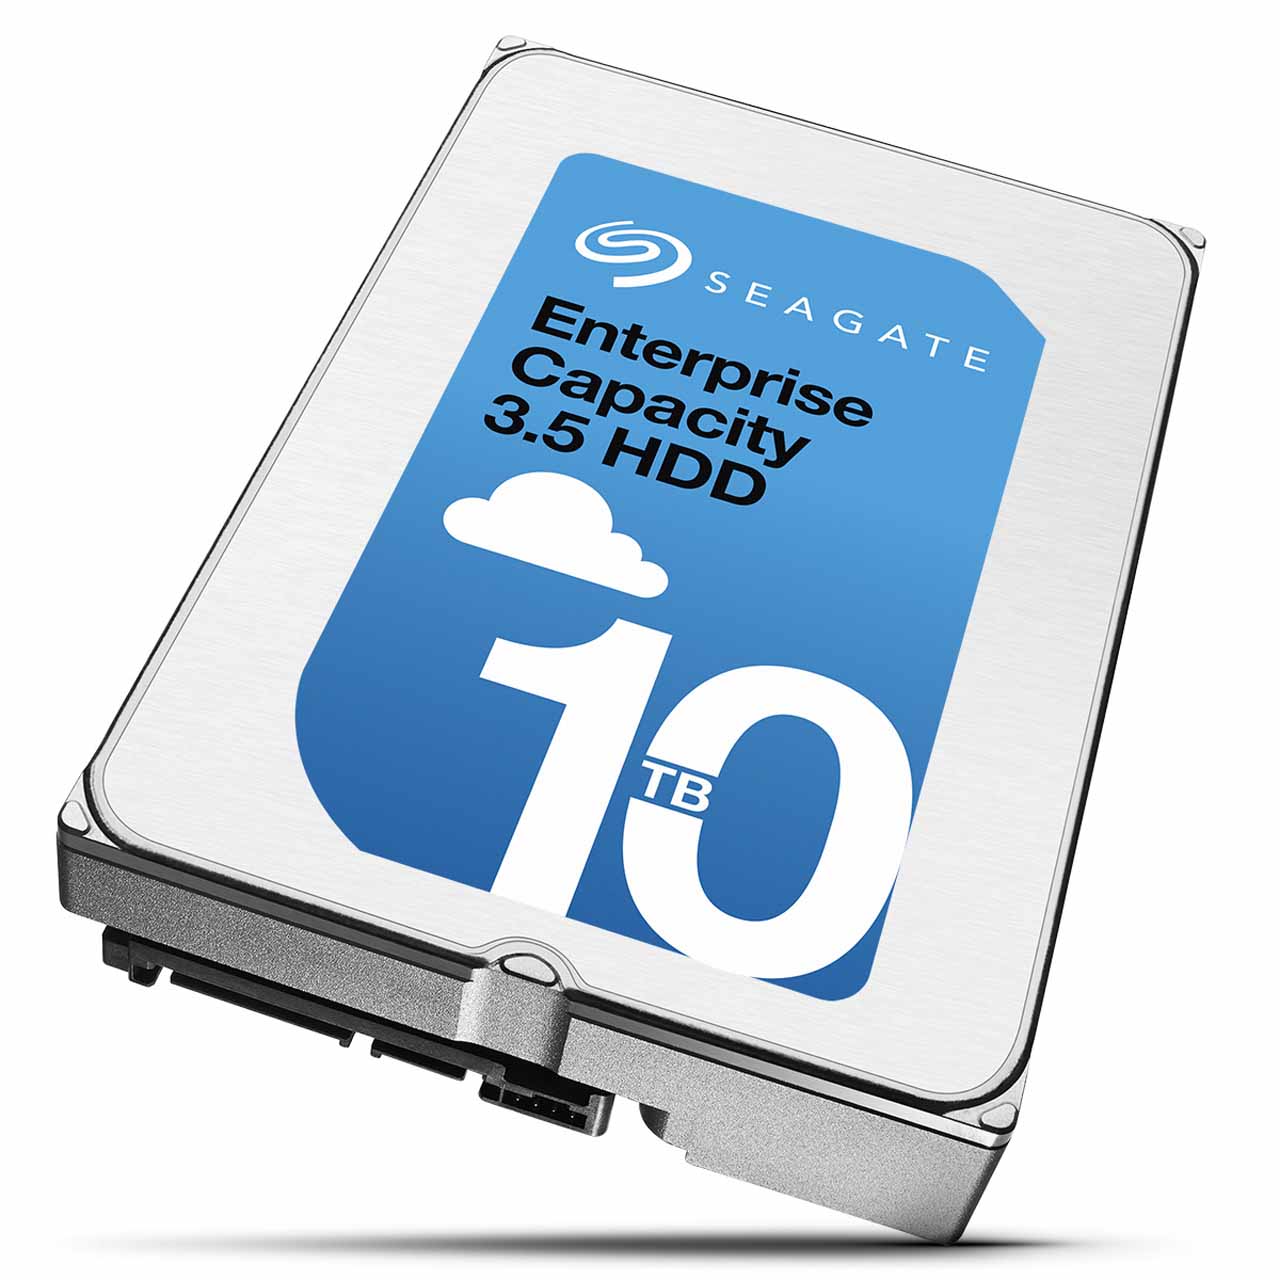 Seagate Q4 Guidance Up, Announces Additional 6,500 Layoffs To Keep It